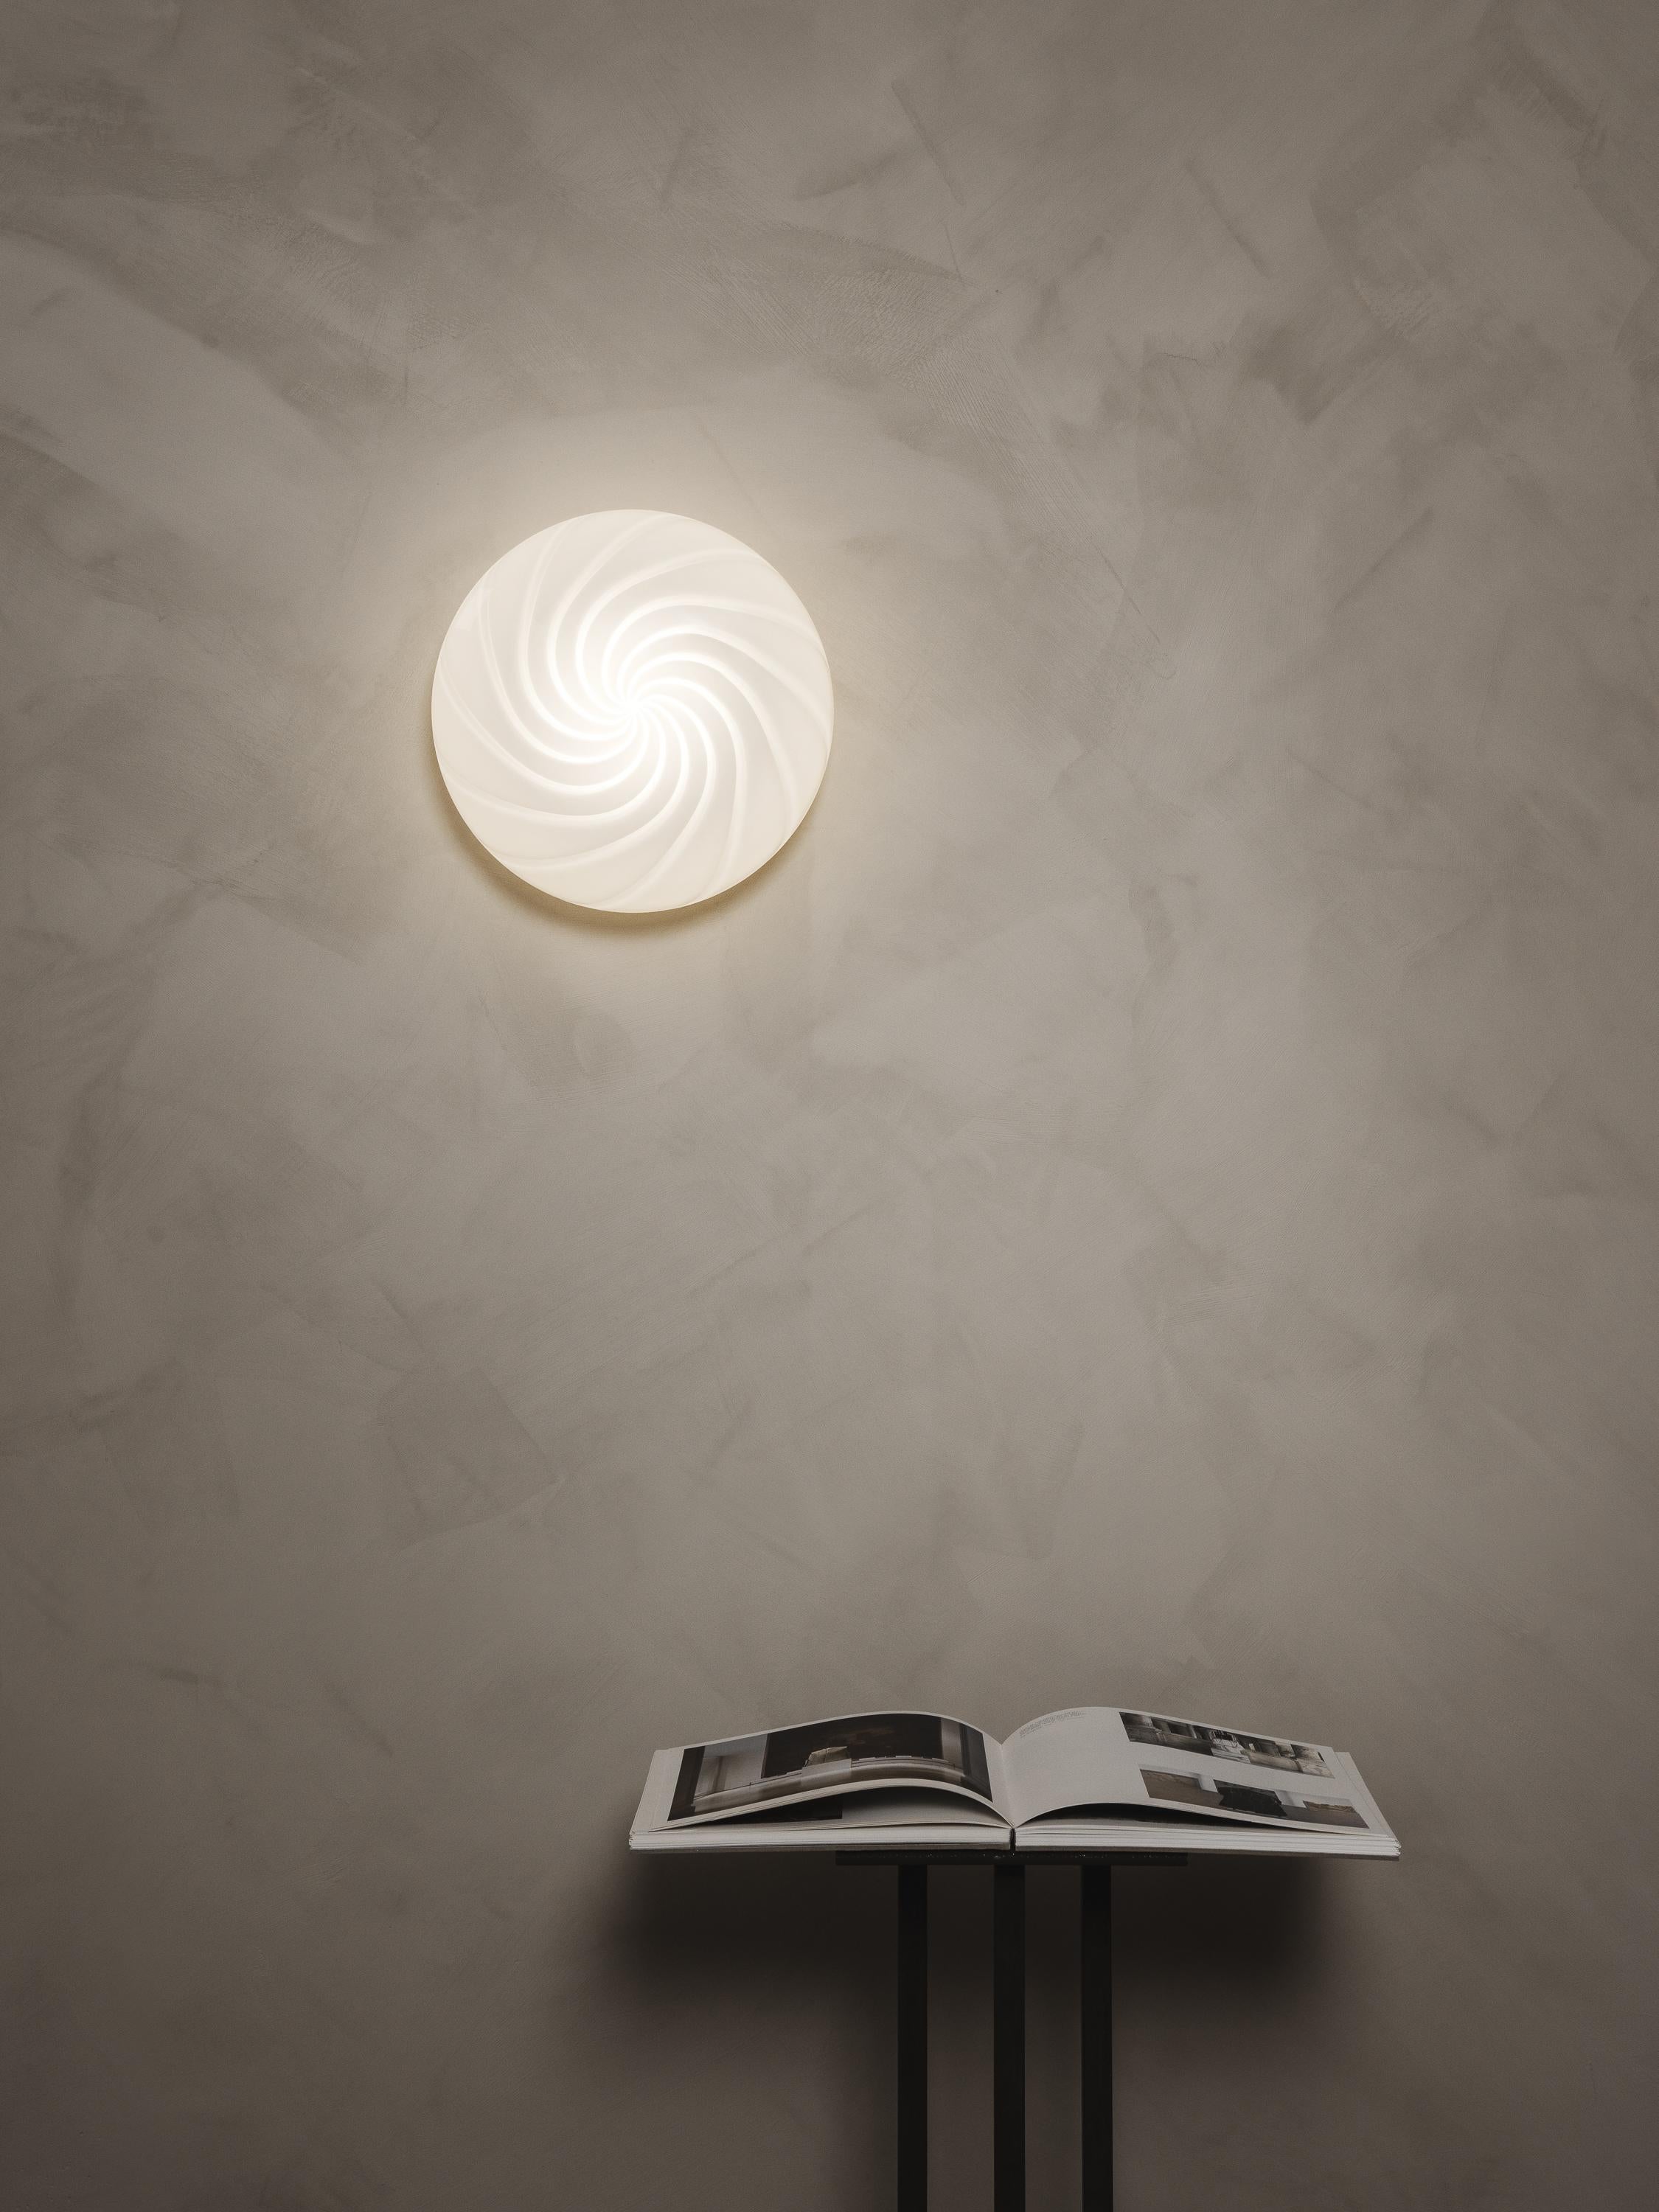 Defined by its curved mouth-blown opaline glass shade, this flush mount plafond lamp can be fixed on a wall or ceiling through a fitted hand-casted solid brass mount. The design features a swirl pattern obtained using an original 1970s mould,